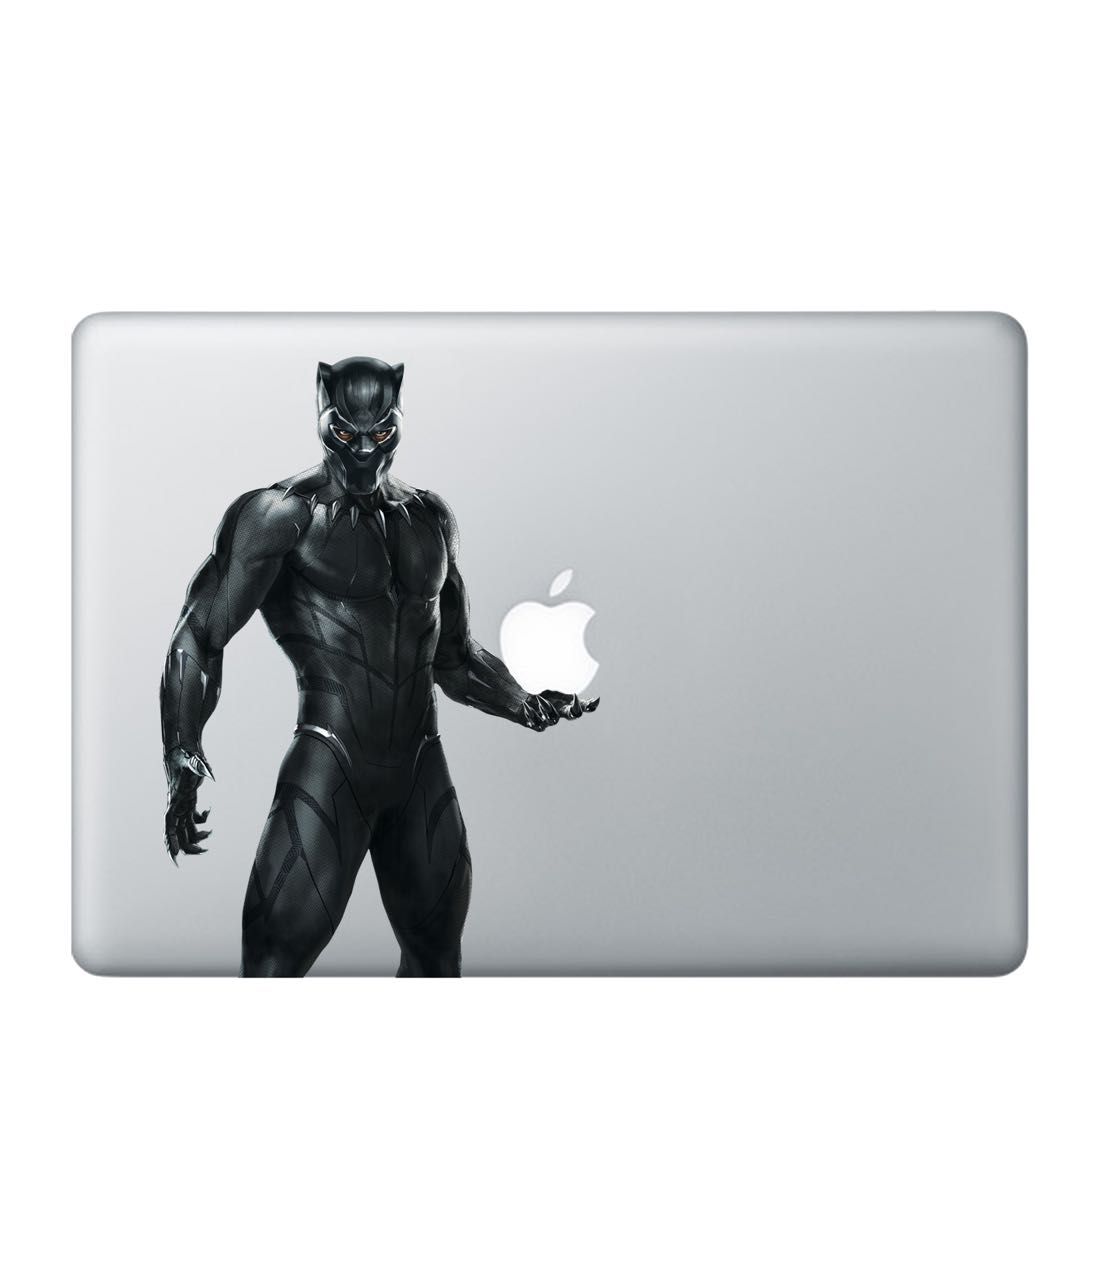 Black Panther Poses With Power And Confidence On Transparent Background, Black  Panther, Animal, Transparent PNG Transparent Clipart Image and PSD File for  Free Download